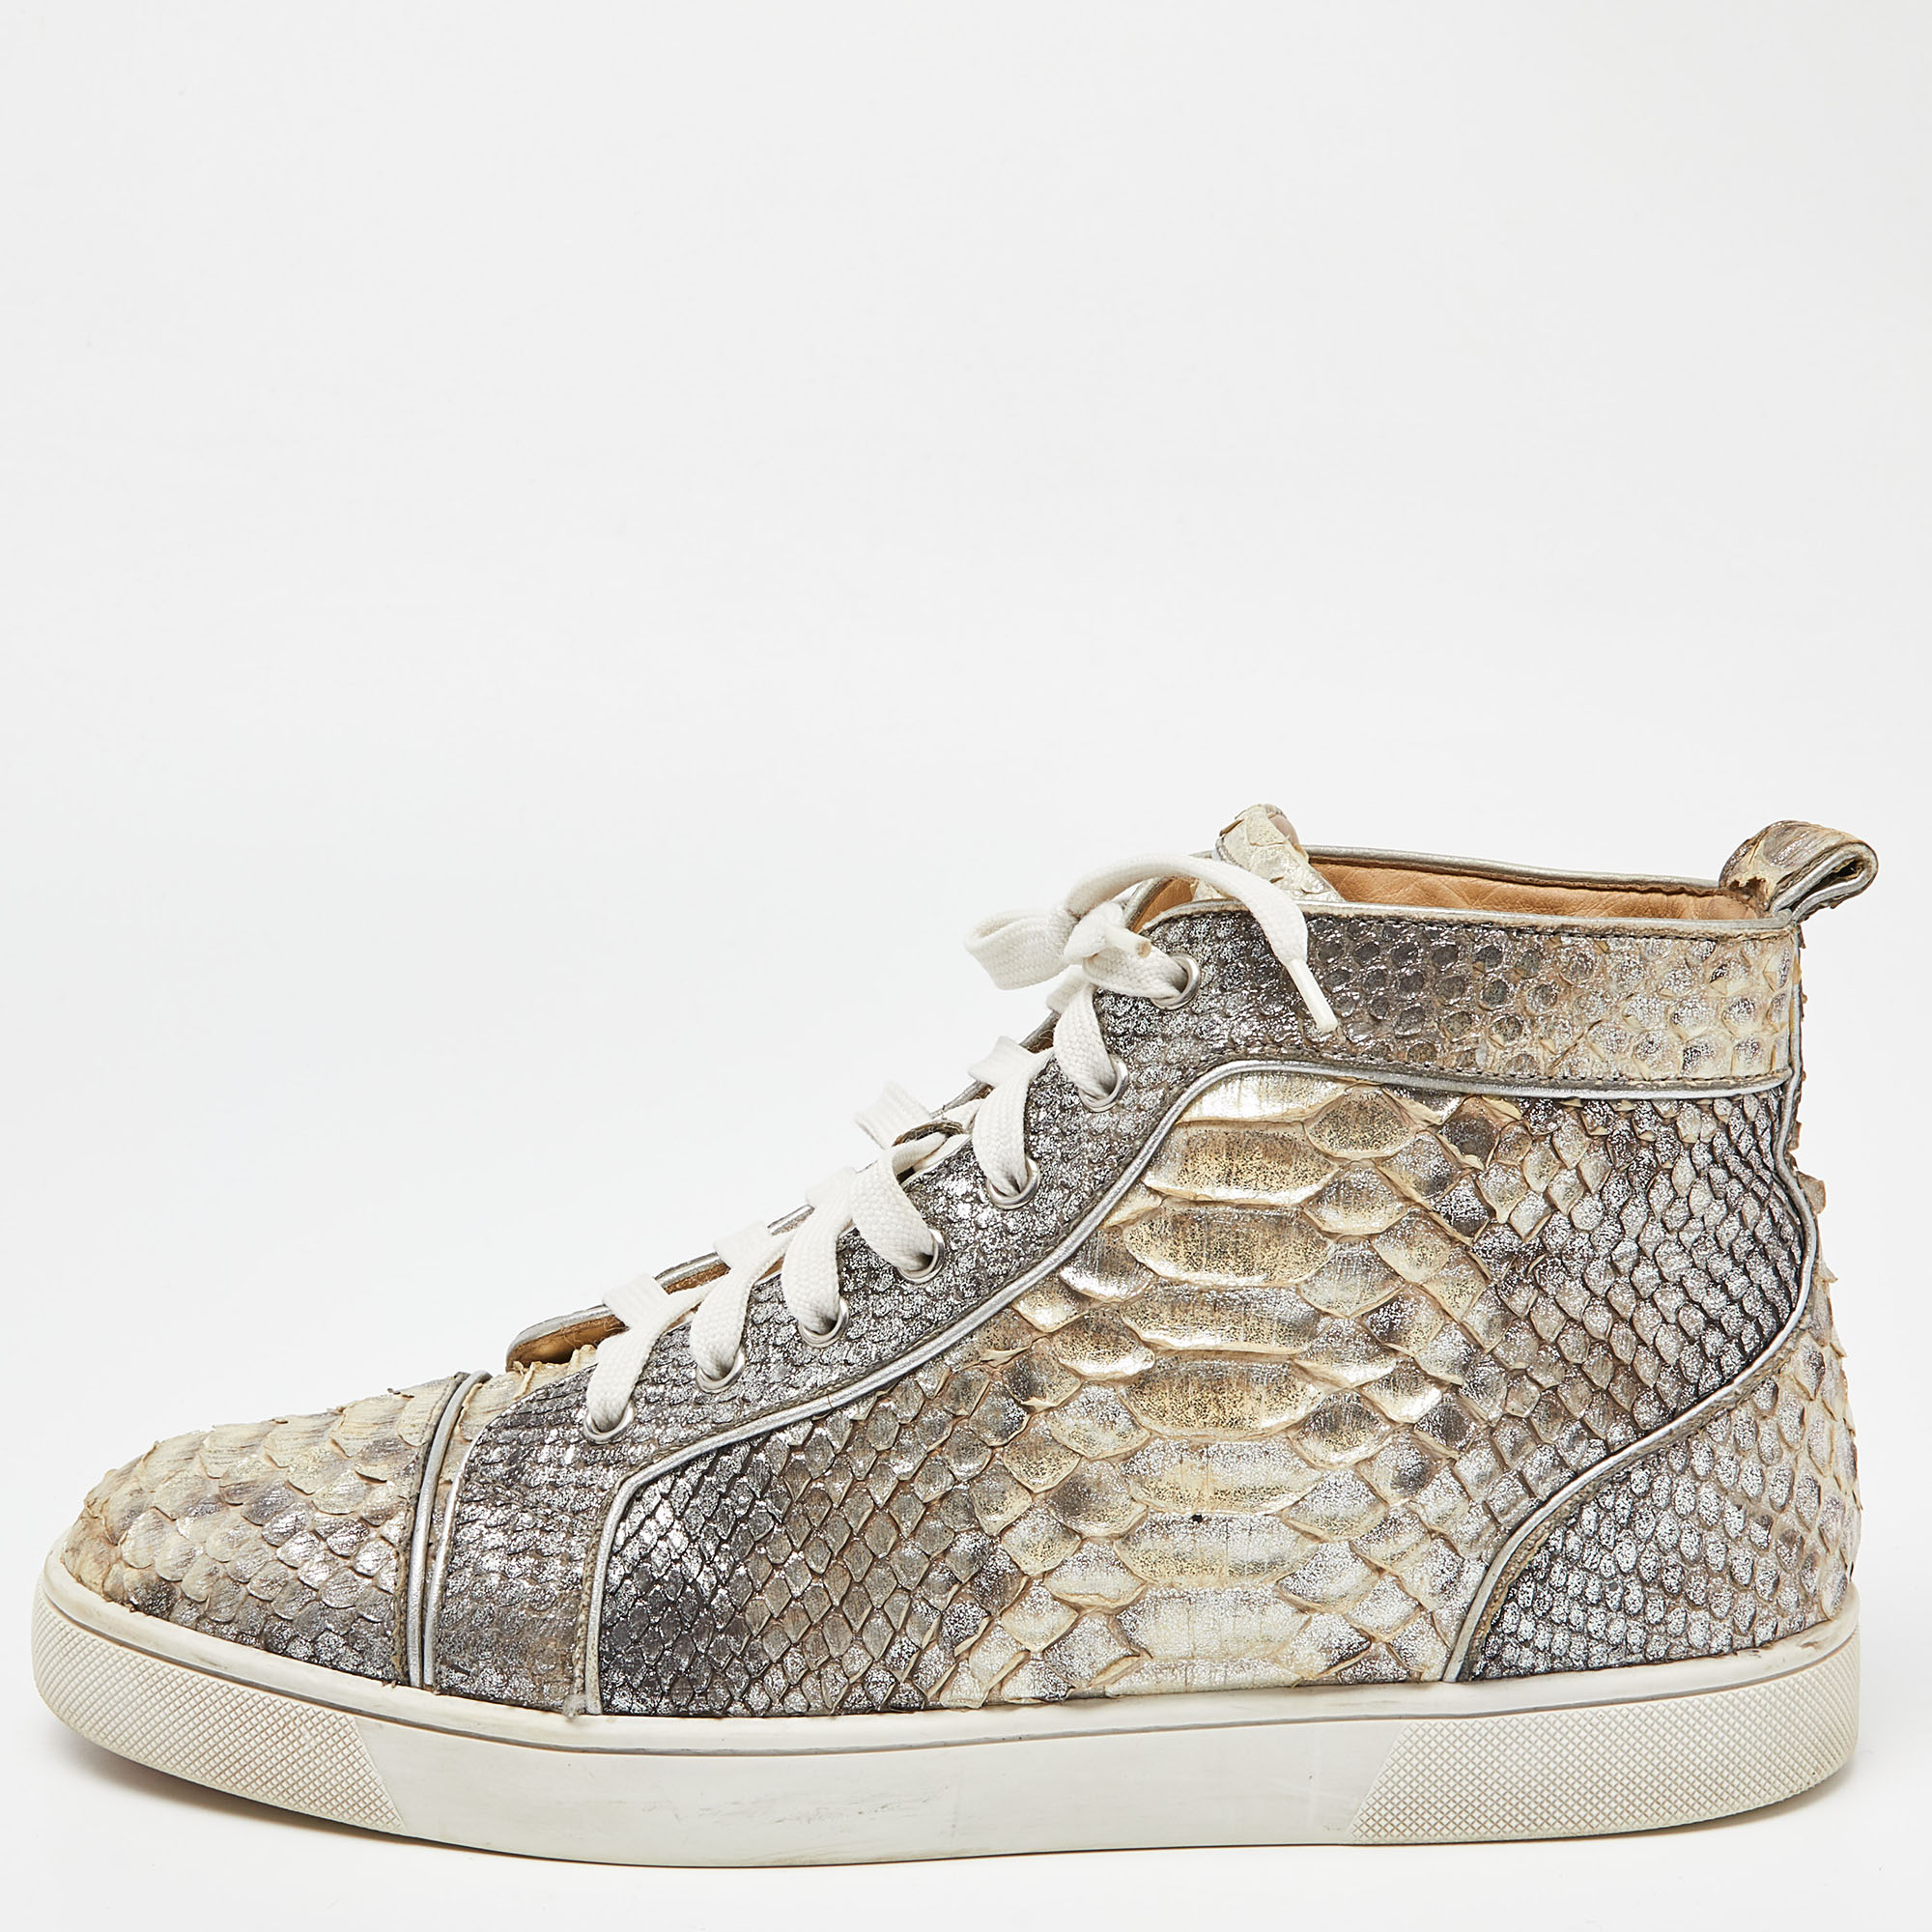 Pre-owned Christian Louboutin Metallic Gold Python High Top Sneakers Size 44.5